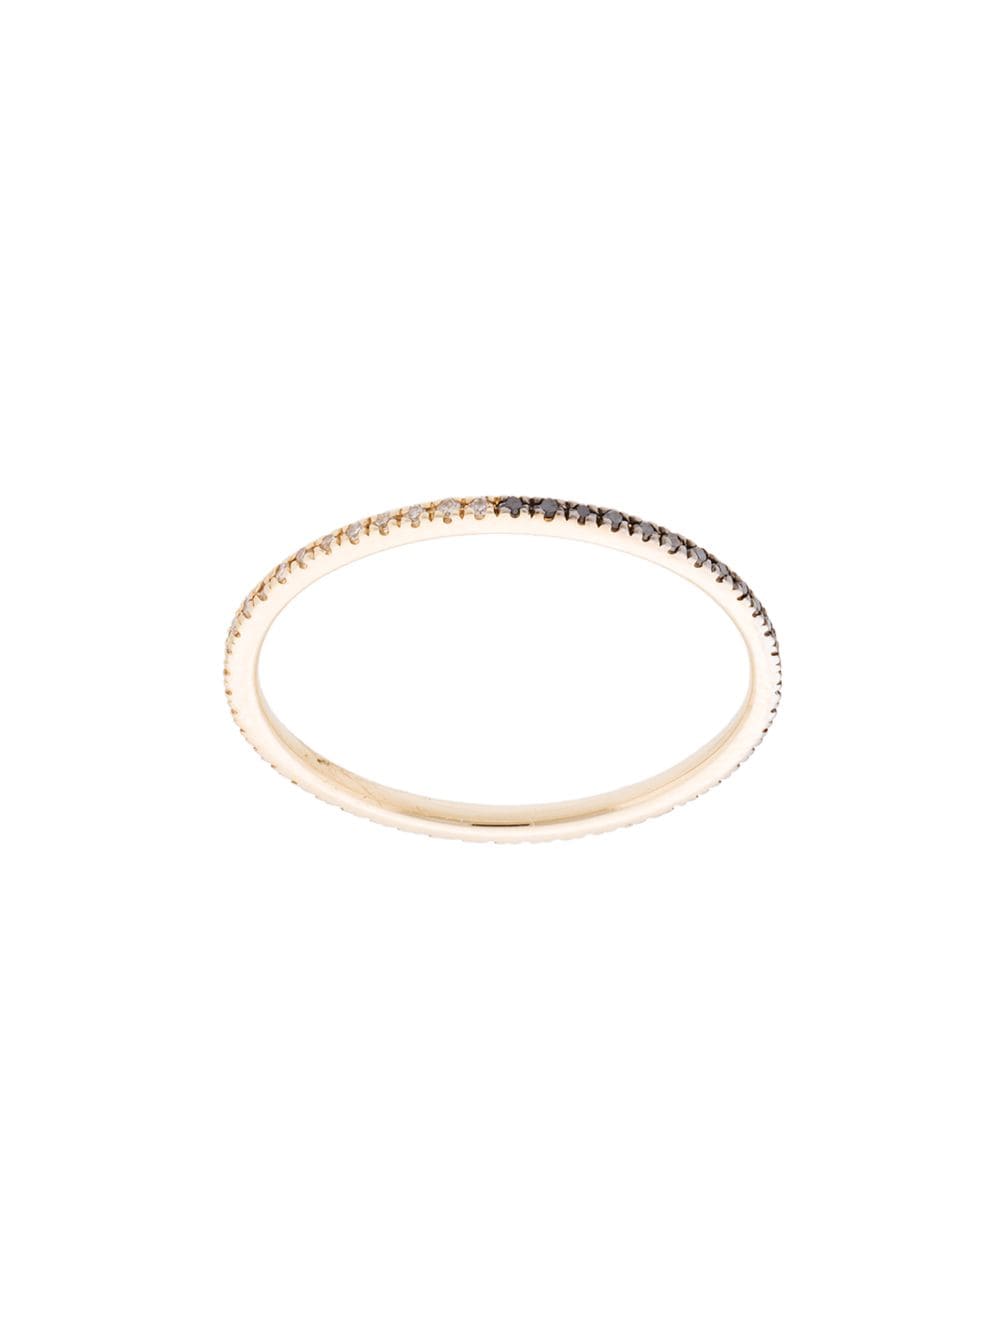 Ef Collection two tone diamond eternity band ring $295 - Buy SS19 ...